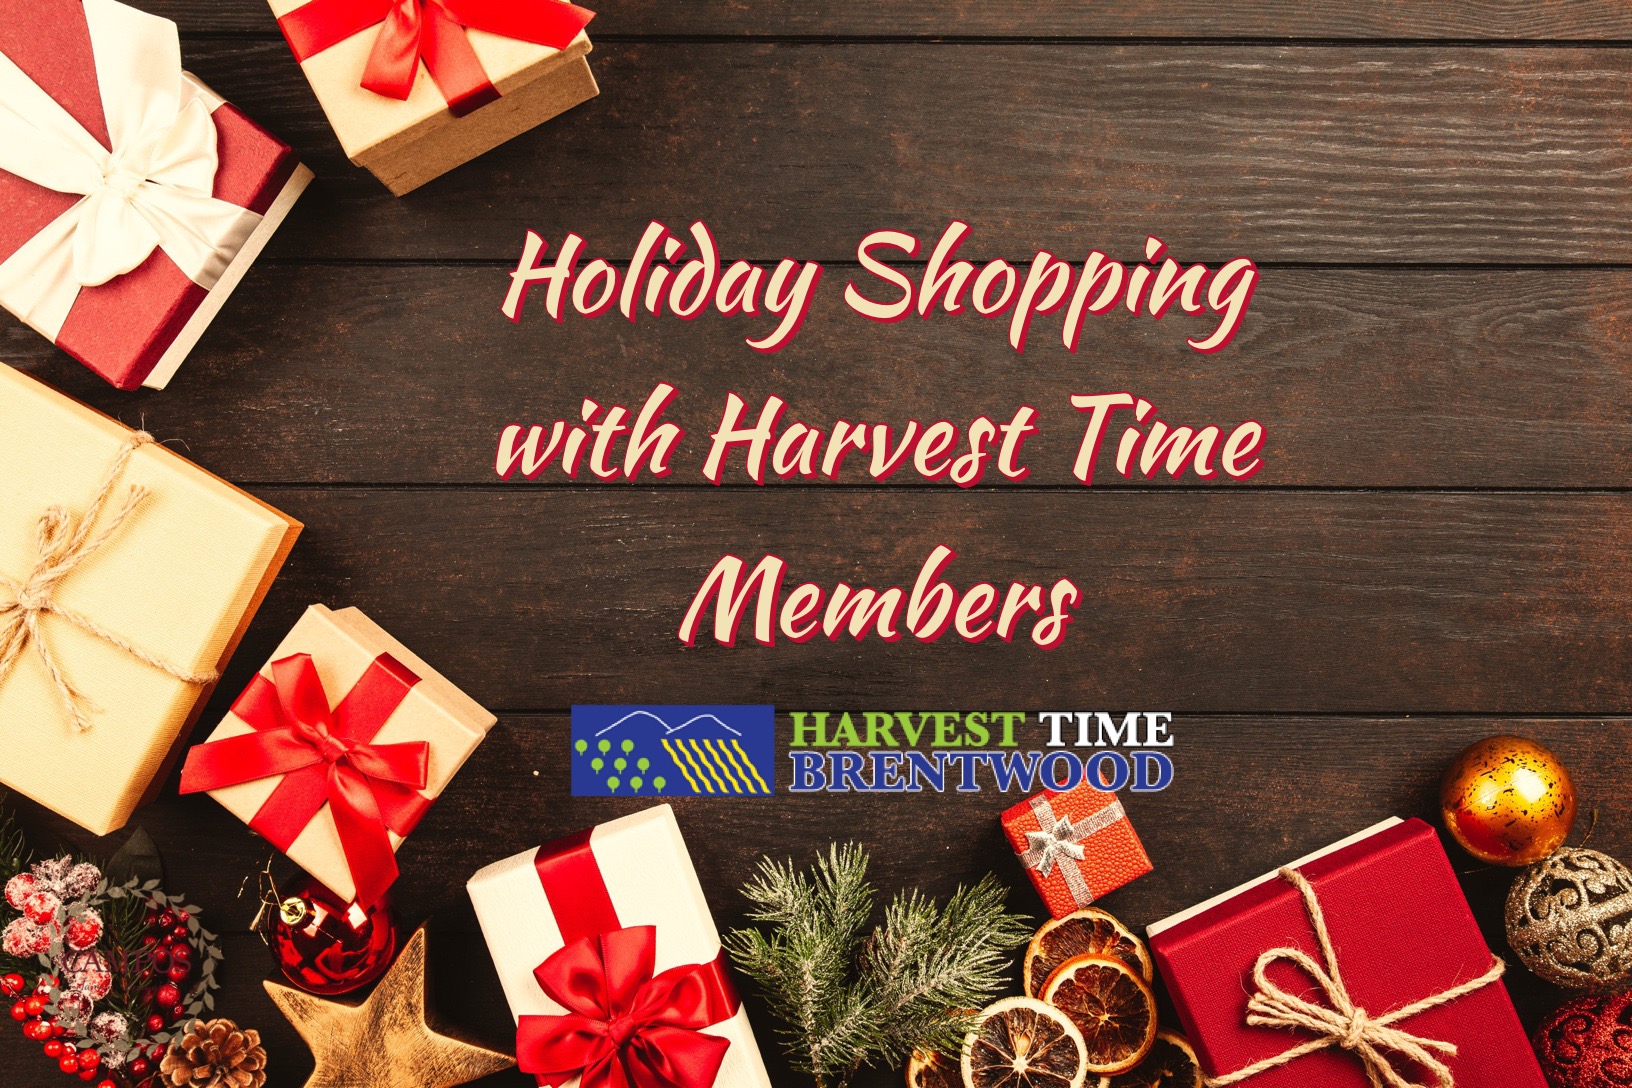 Holiday Shopping and Gifts - Harvest Time Brentwood